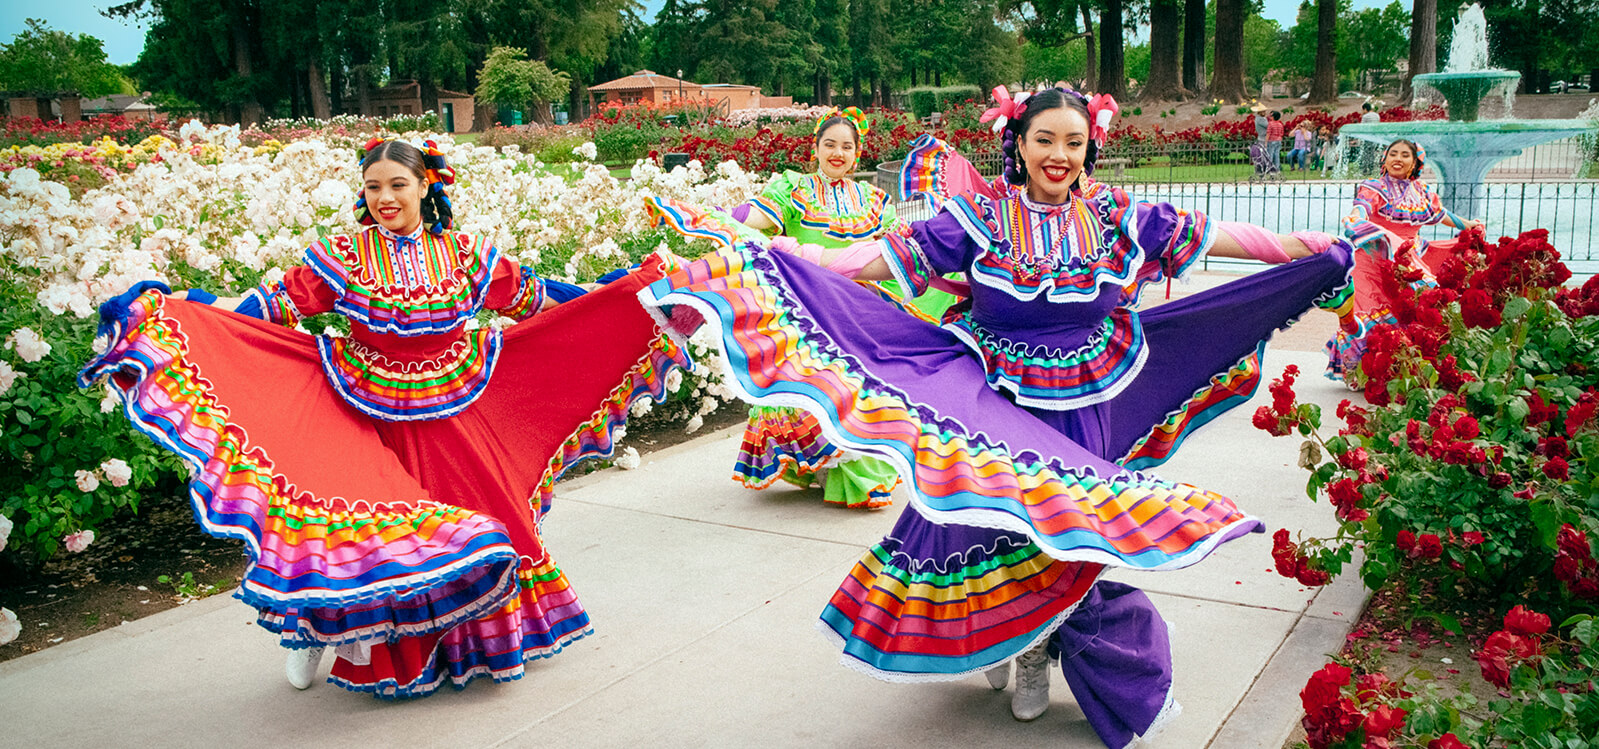 Dancers in tradition Mexican dresses dancing among thousands of rose buds in the Municipal Rose Garden.